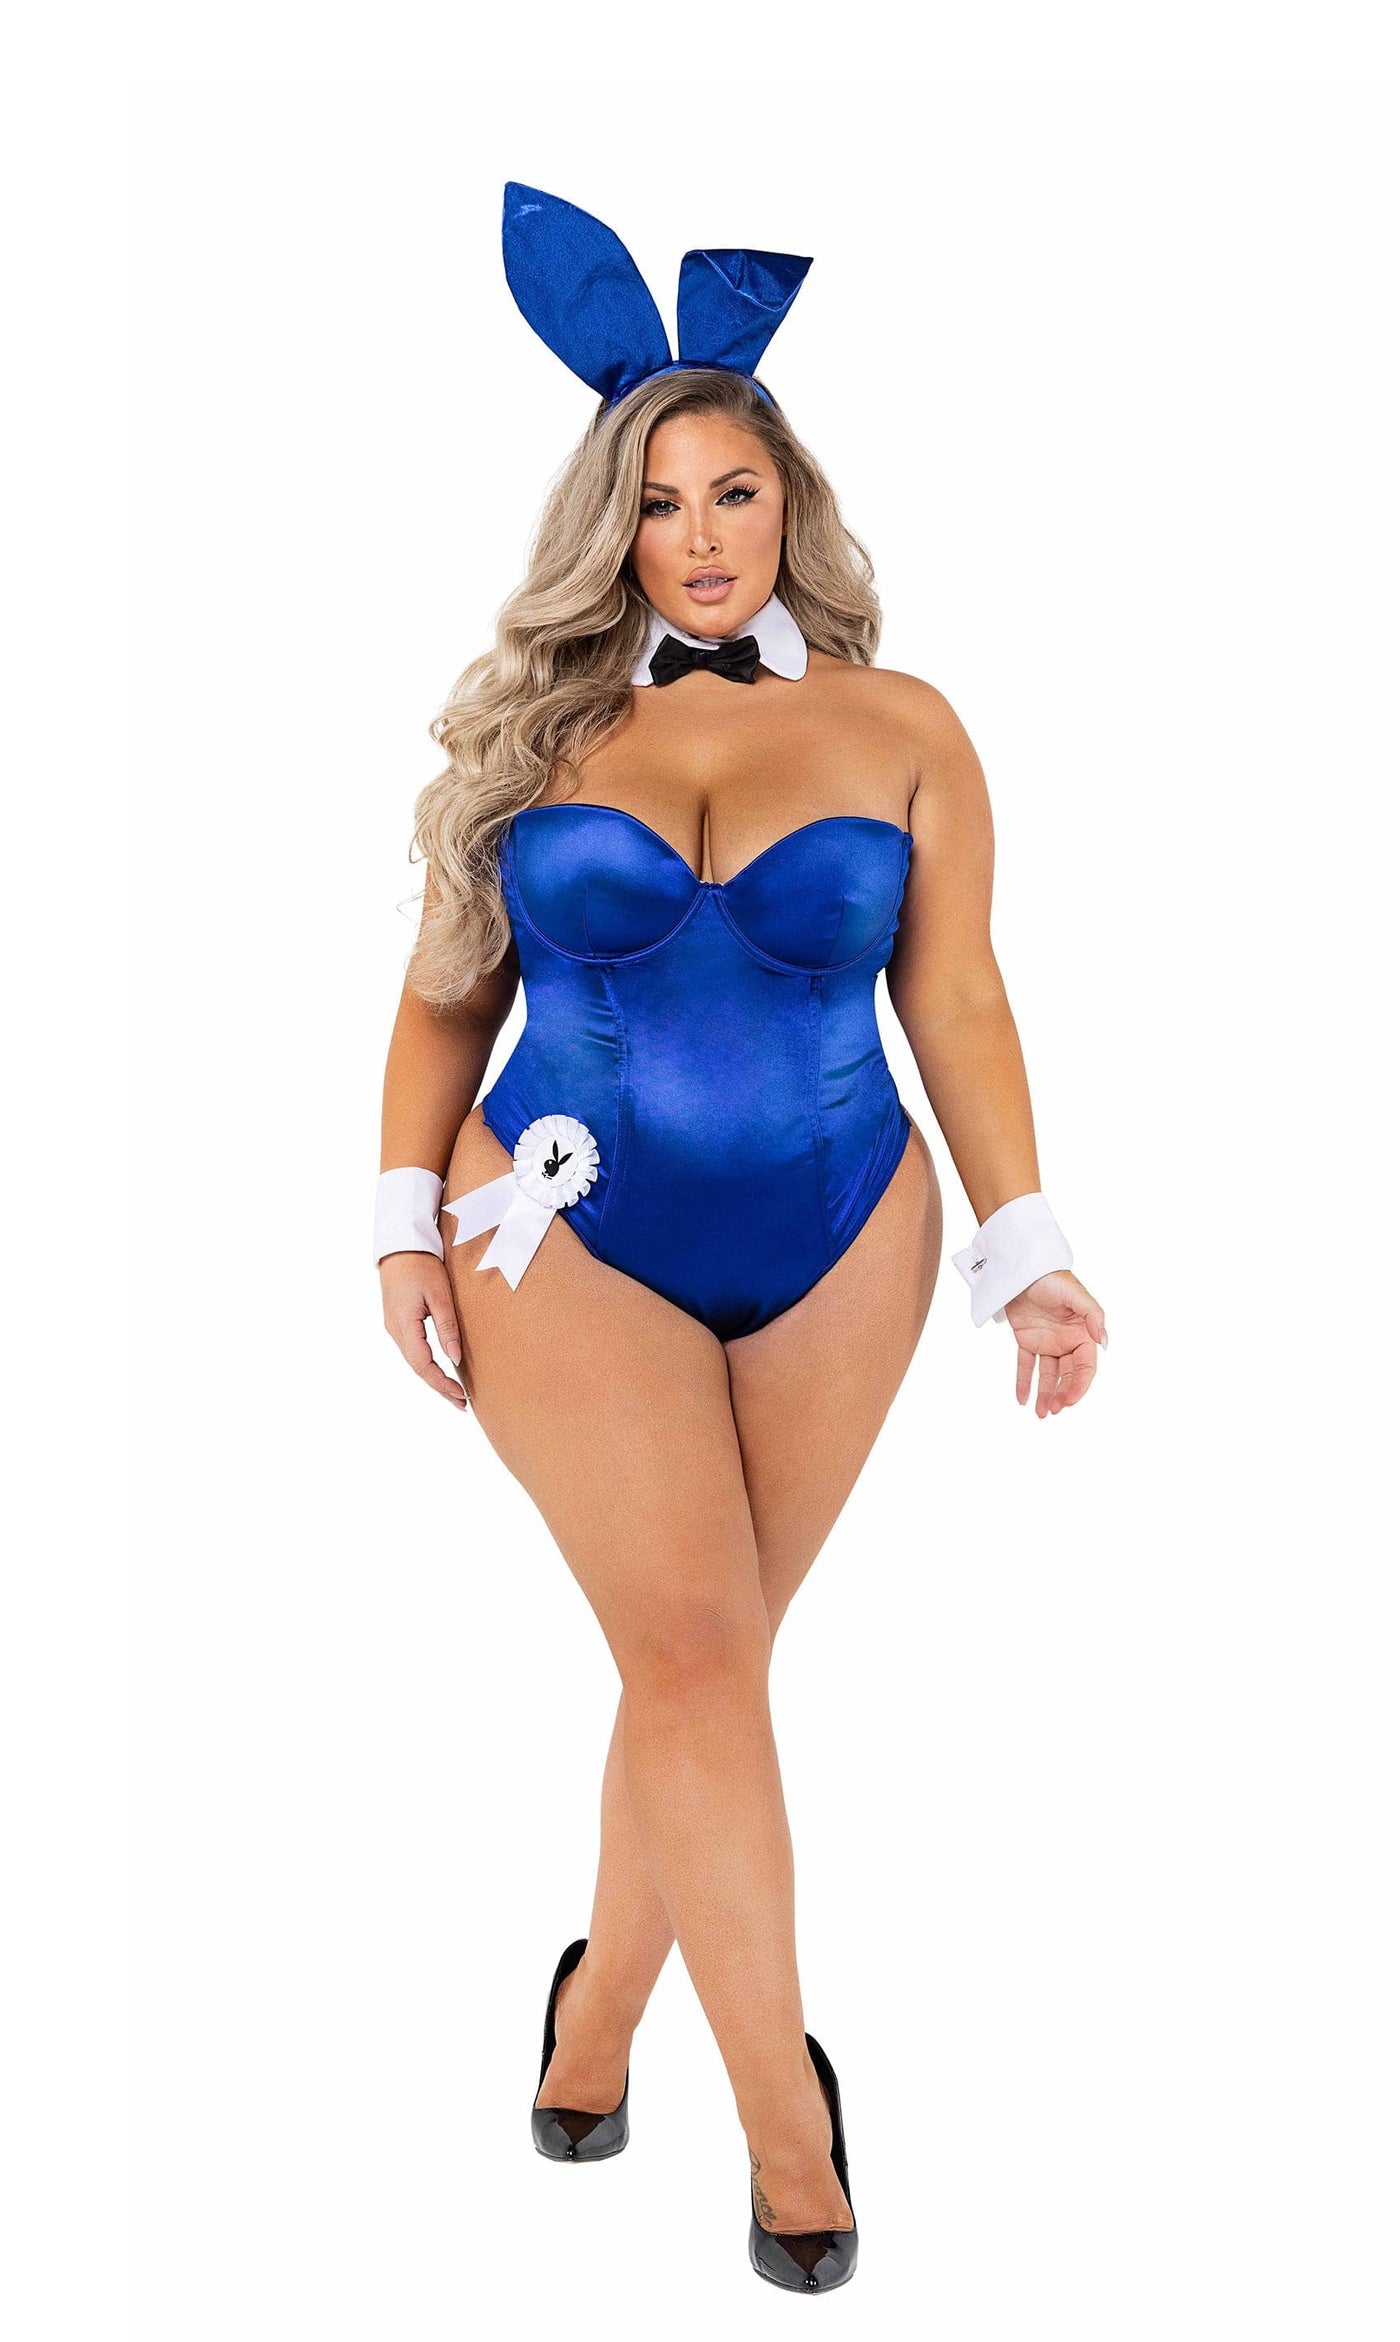 8pc. Official Playboy Bunny Classic Playmate Women's Costume - For Love of Lingerie